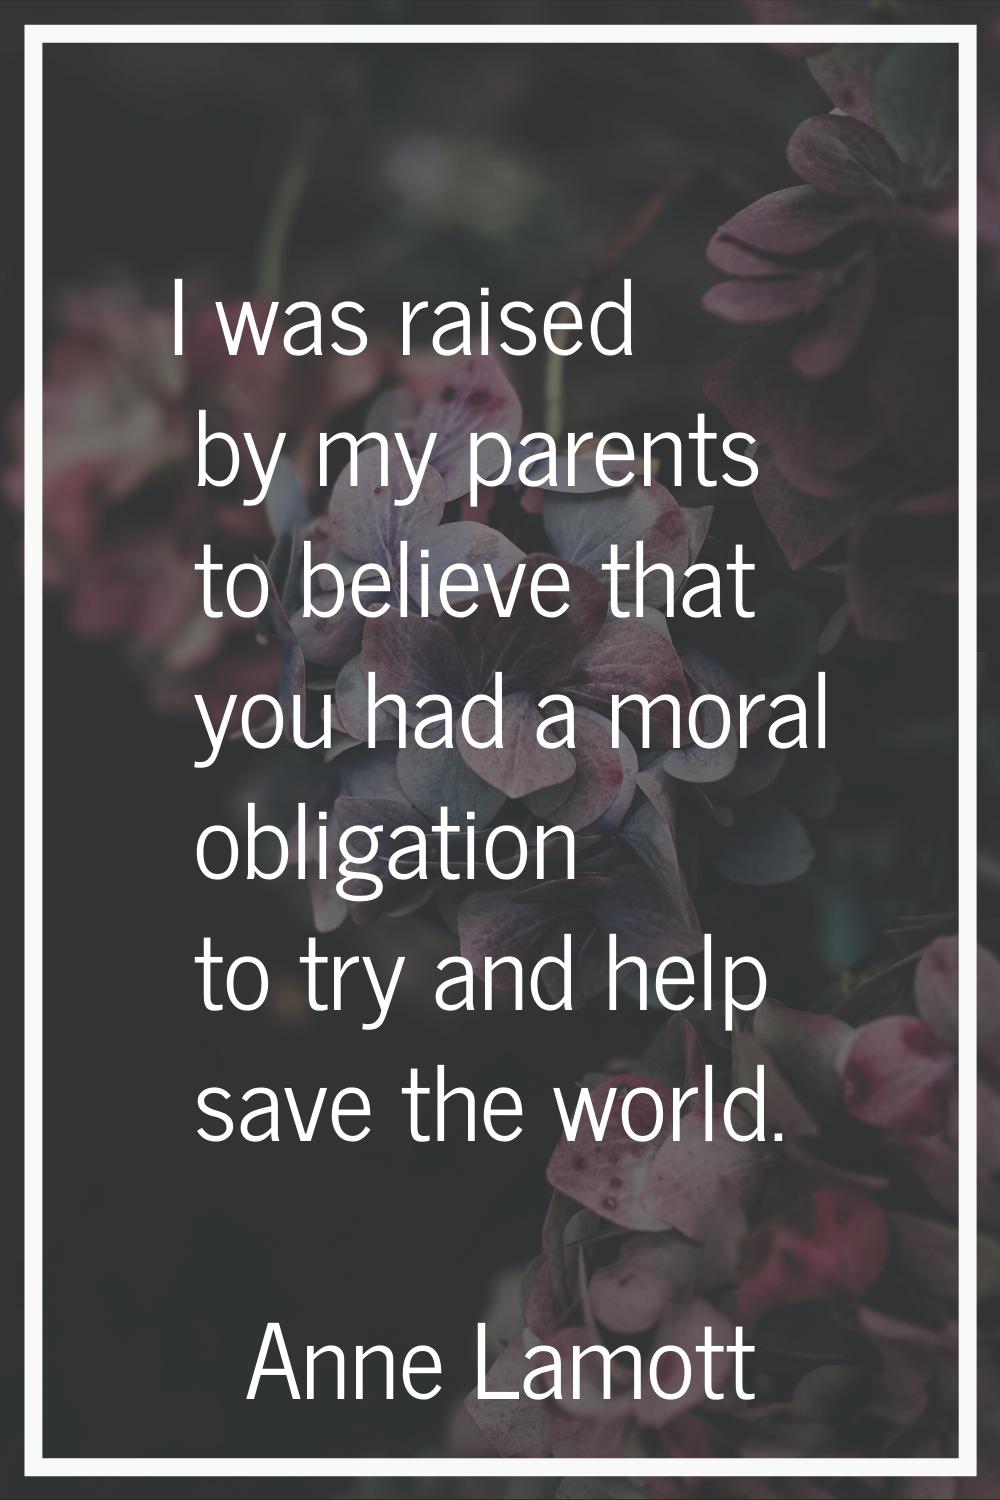 I was raised by my parents to believe that you had a moral obligation to try and help save the worl